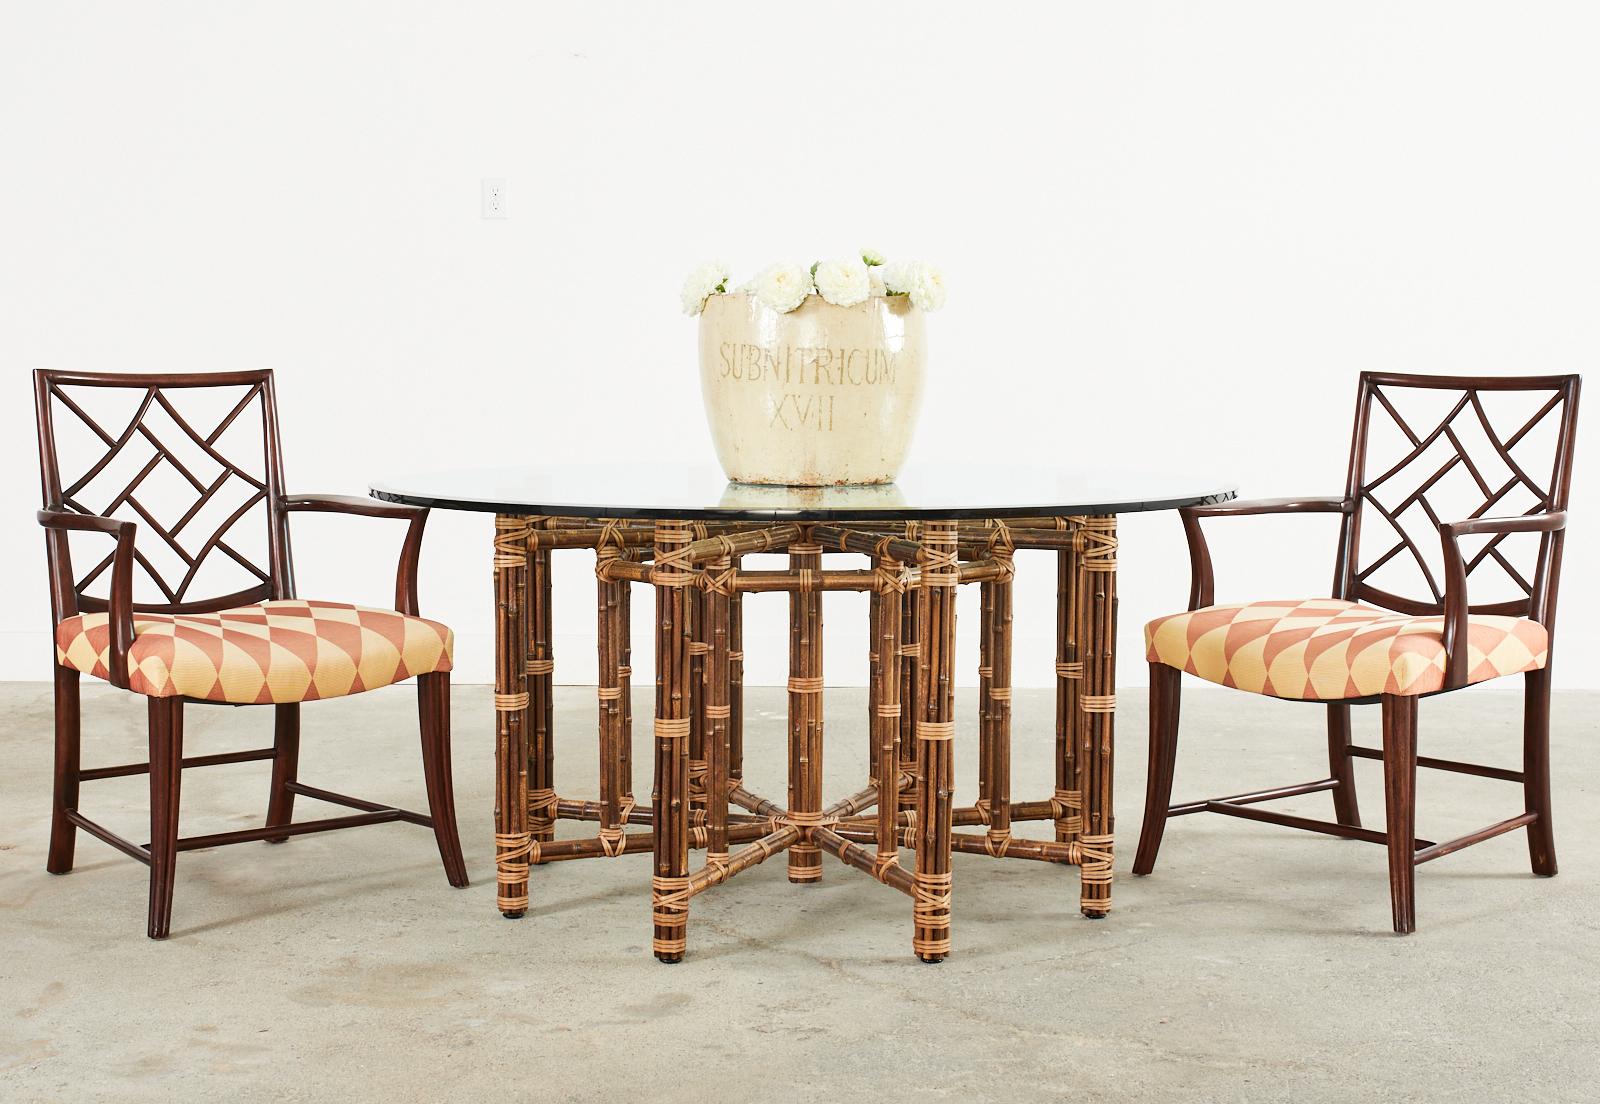 Dramatic set of eight hardwood dining armchairs made by Dessin Fournir Los Angeles, CA. The chairs are crafted in the Chinese Chippendale taste with an open fretwork design back and generous seat. Upholstered with a whimsical harlequin pattern silk